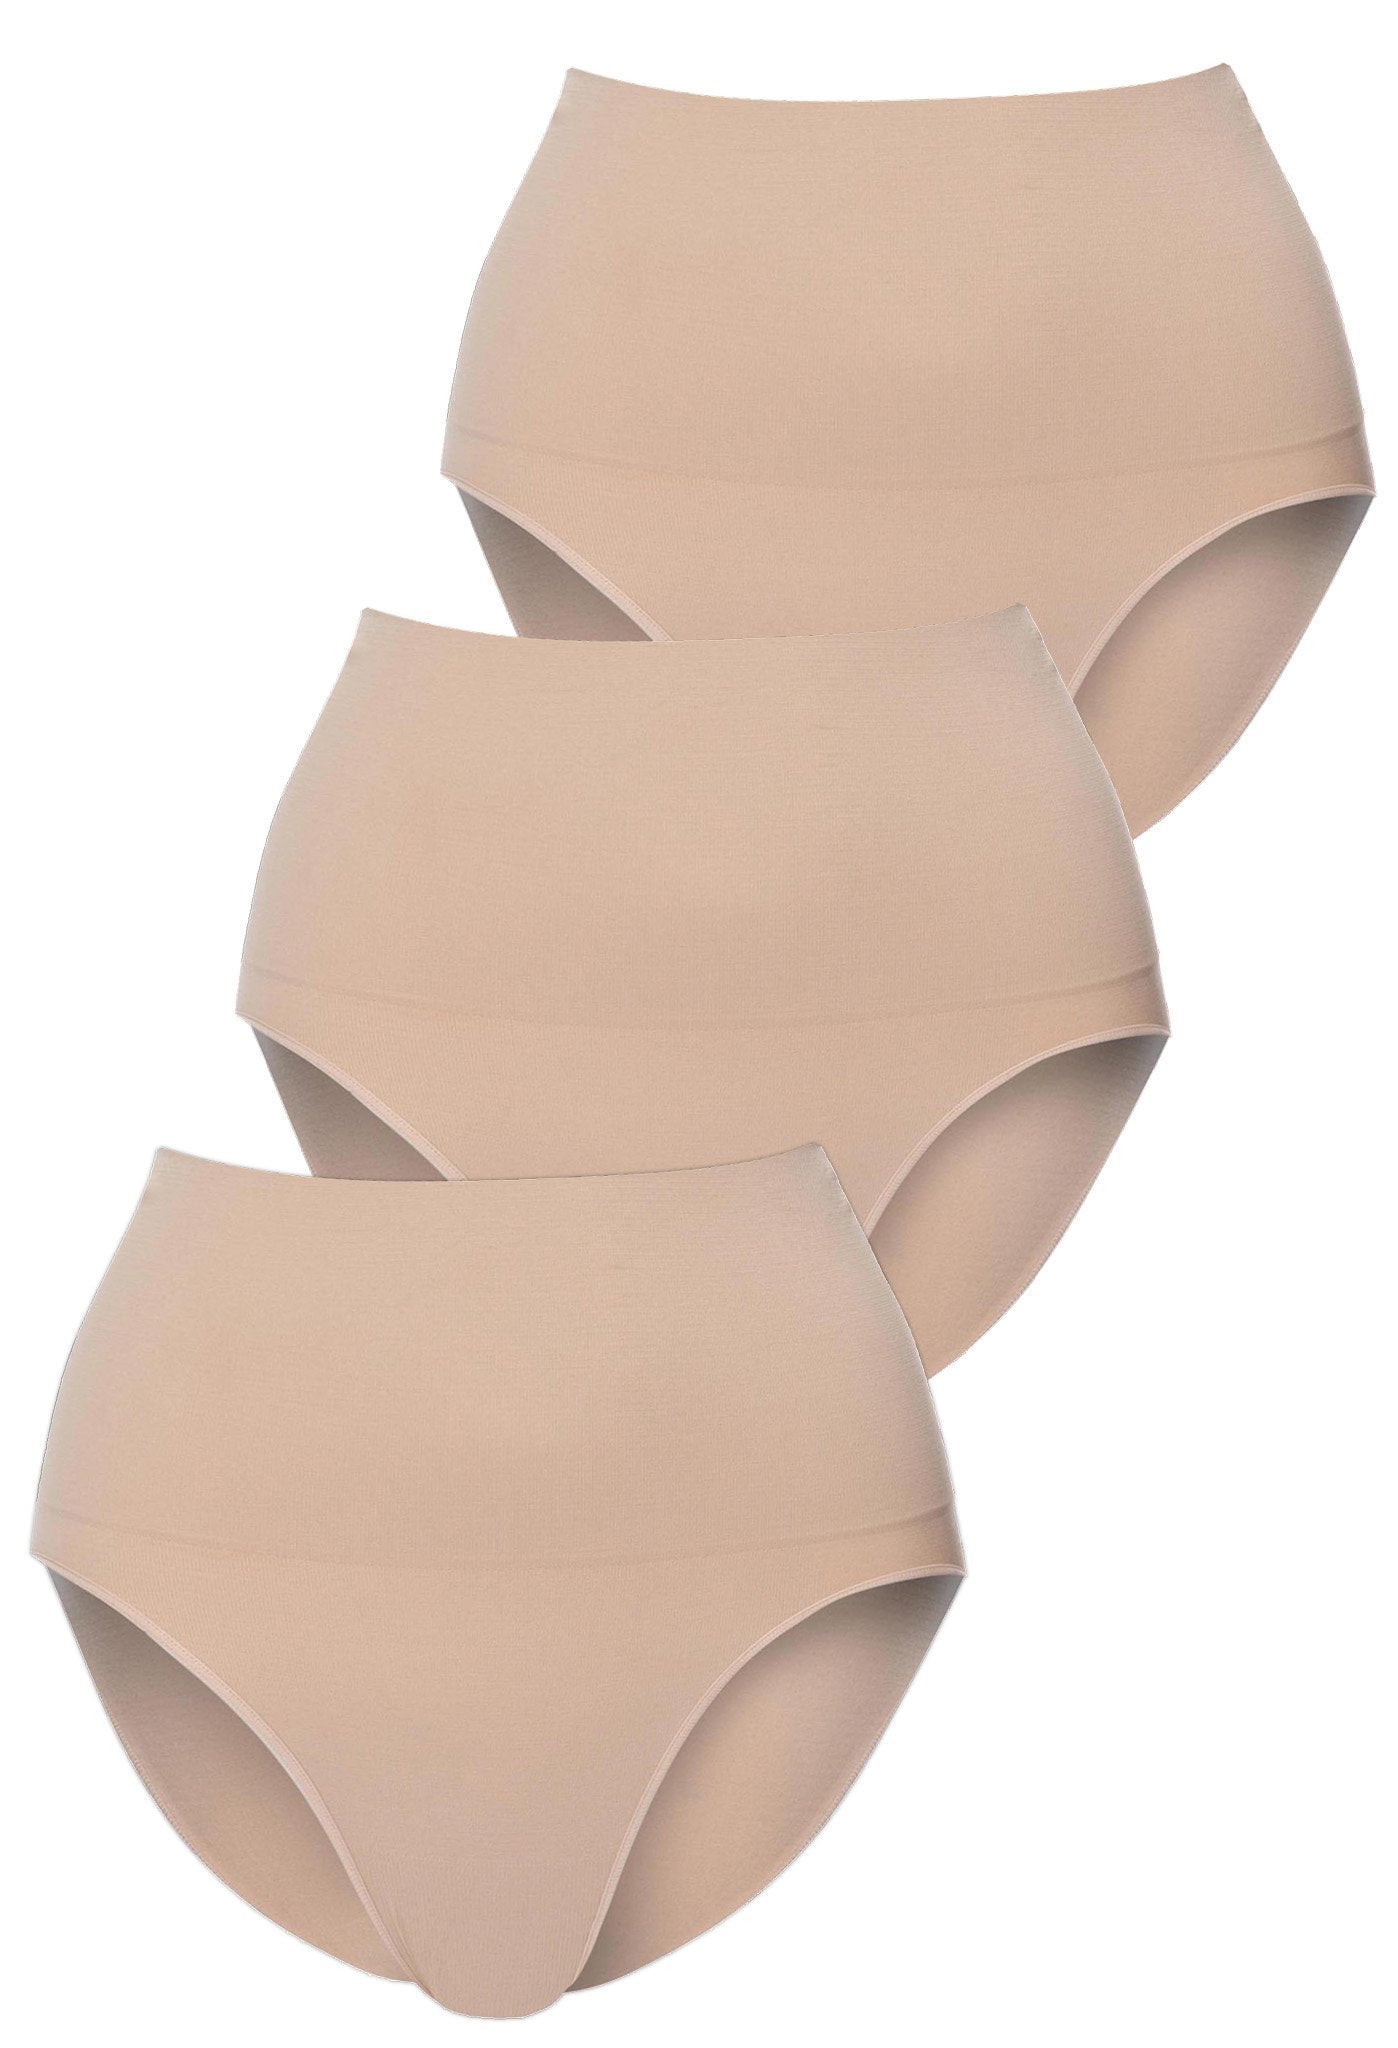 Taking Shape 2Pk Bamboo Everyday Briefs Nude